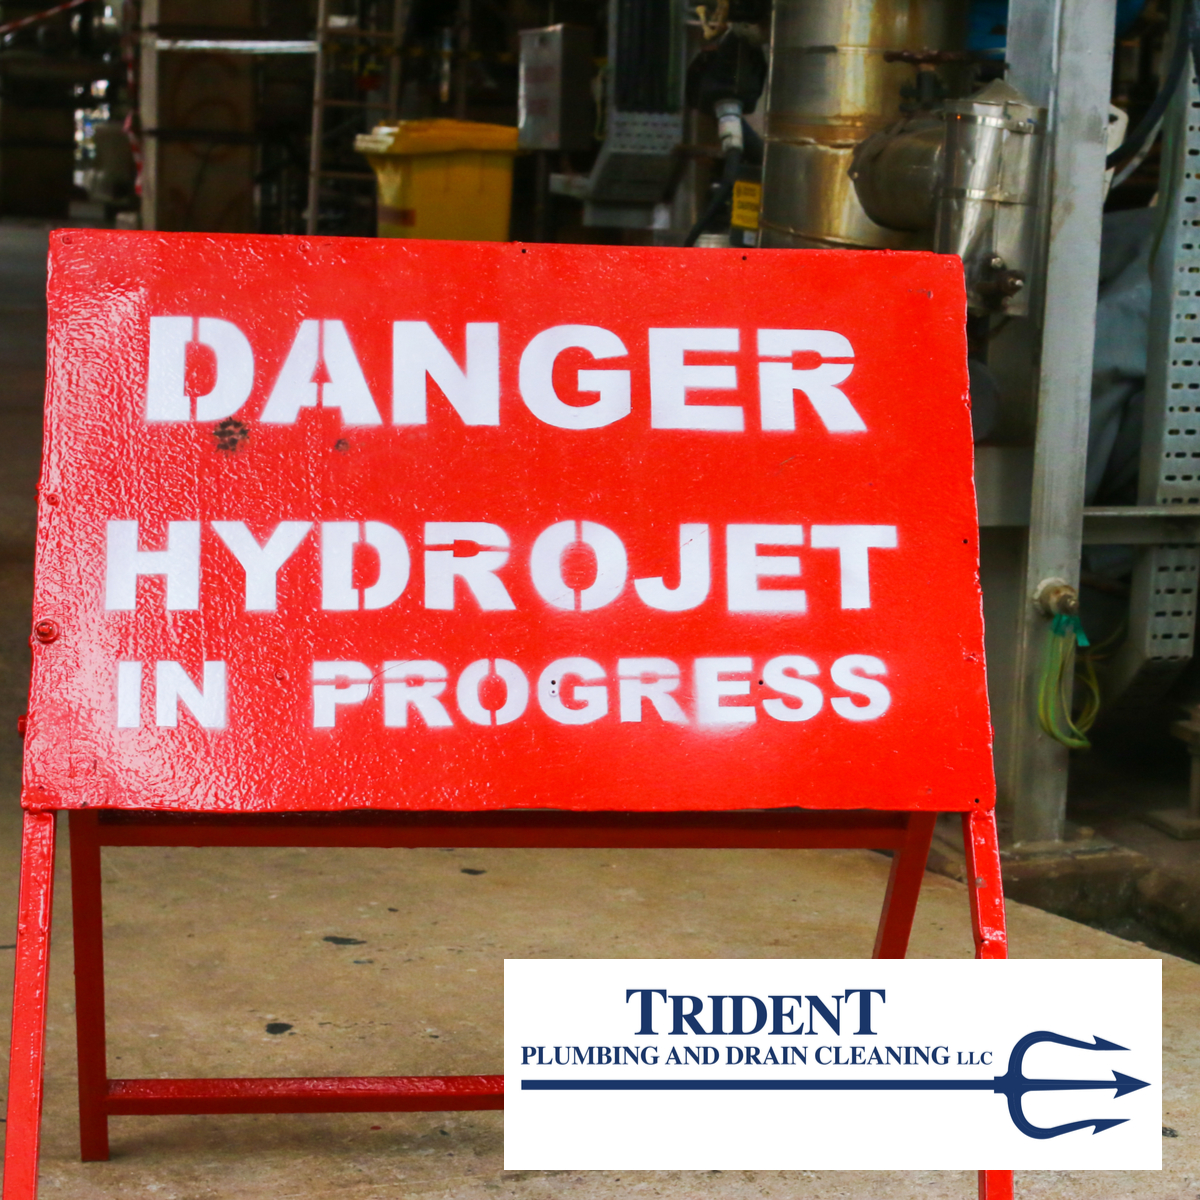 Hydrojetting - Does Your Lynnwood Property Need It?